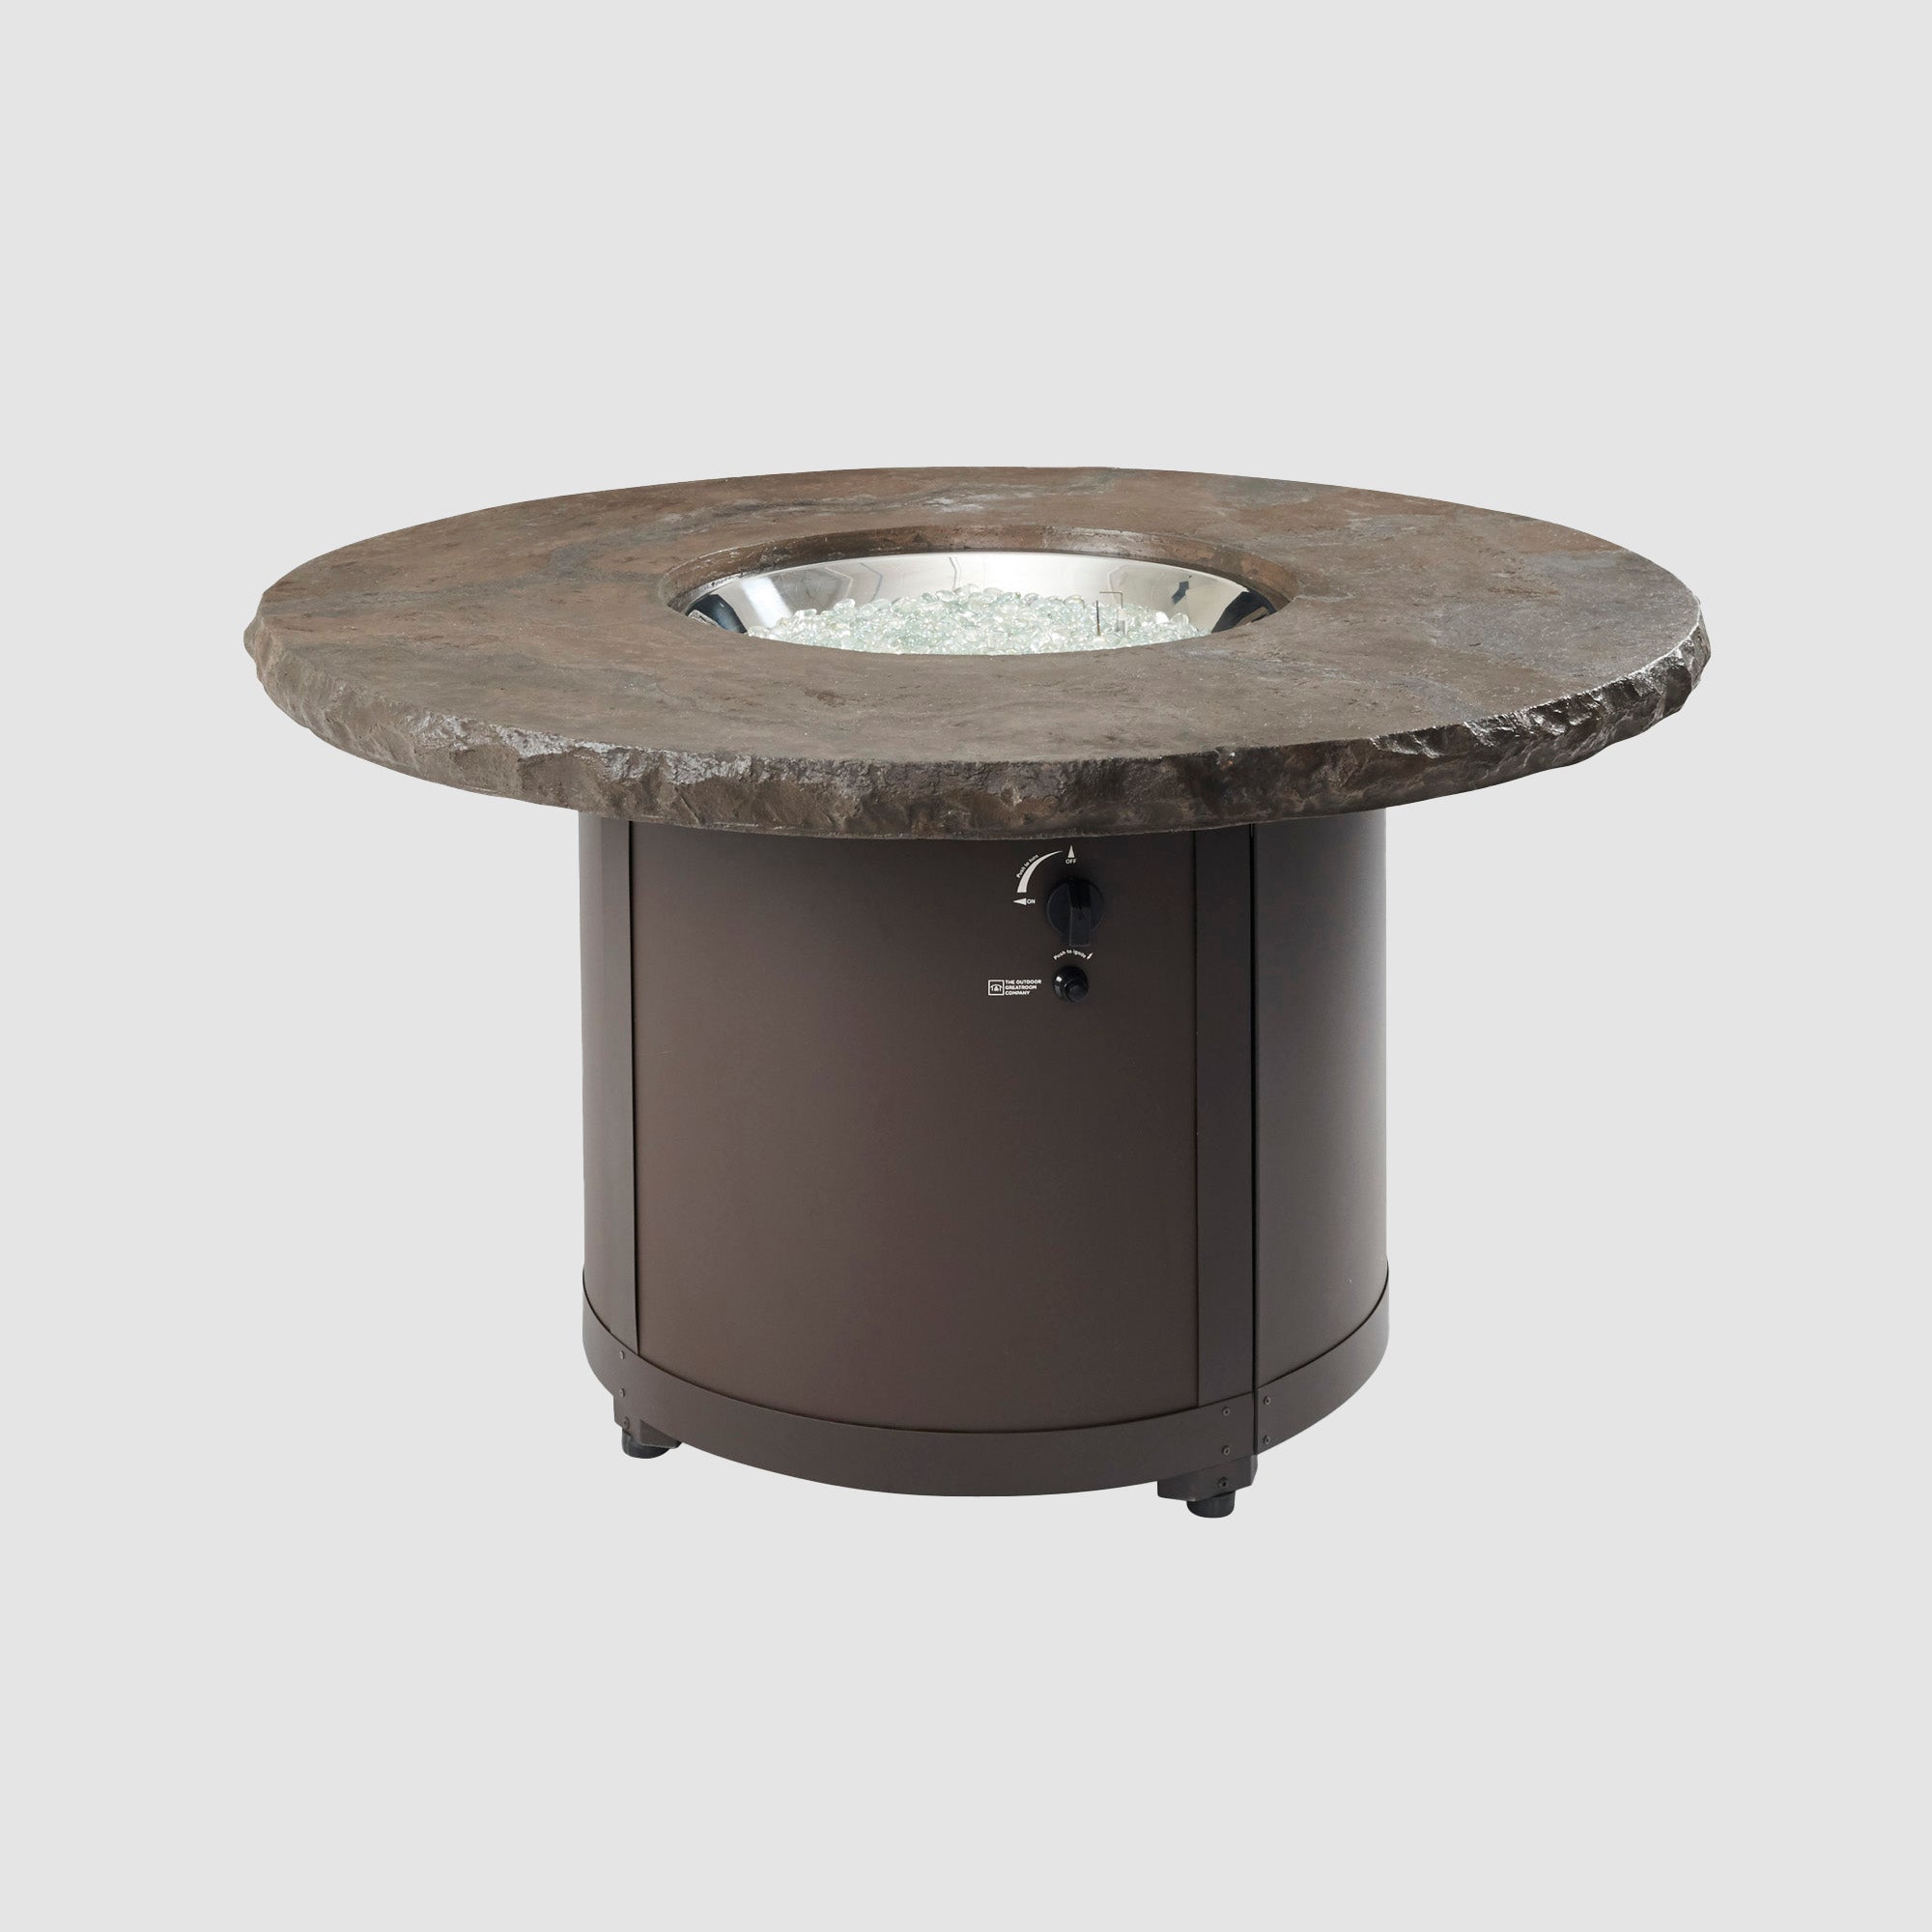 Durable, stylish design Marbleized Noche Beacon Chat Height Gas Fire Pit Table by The Outdoor GreatRoom Company for your patio or deck